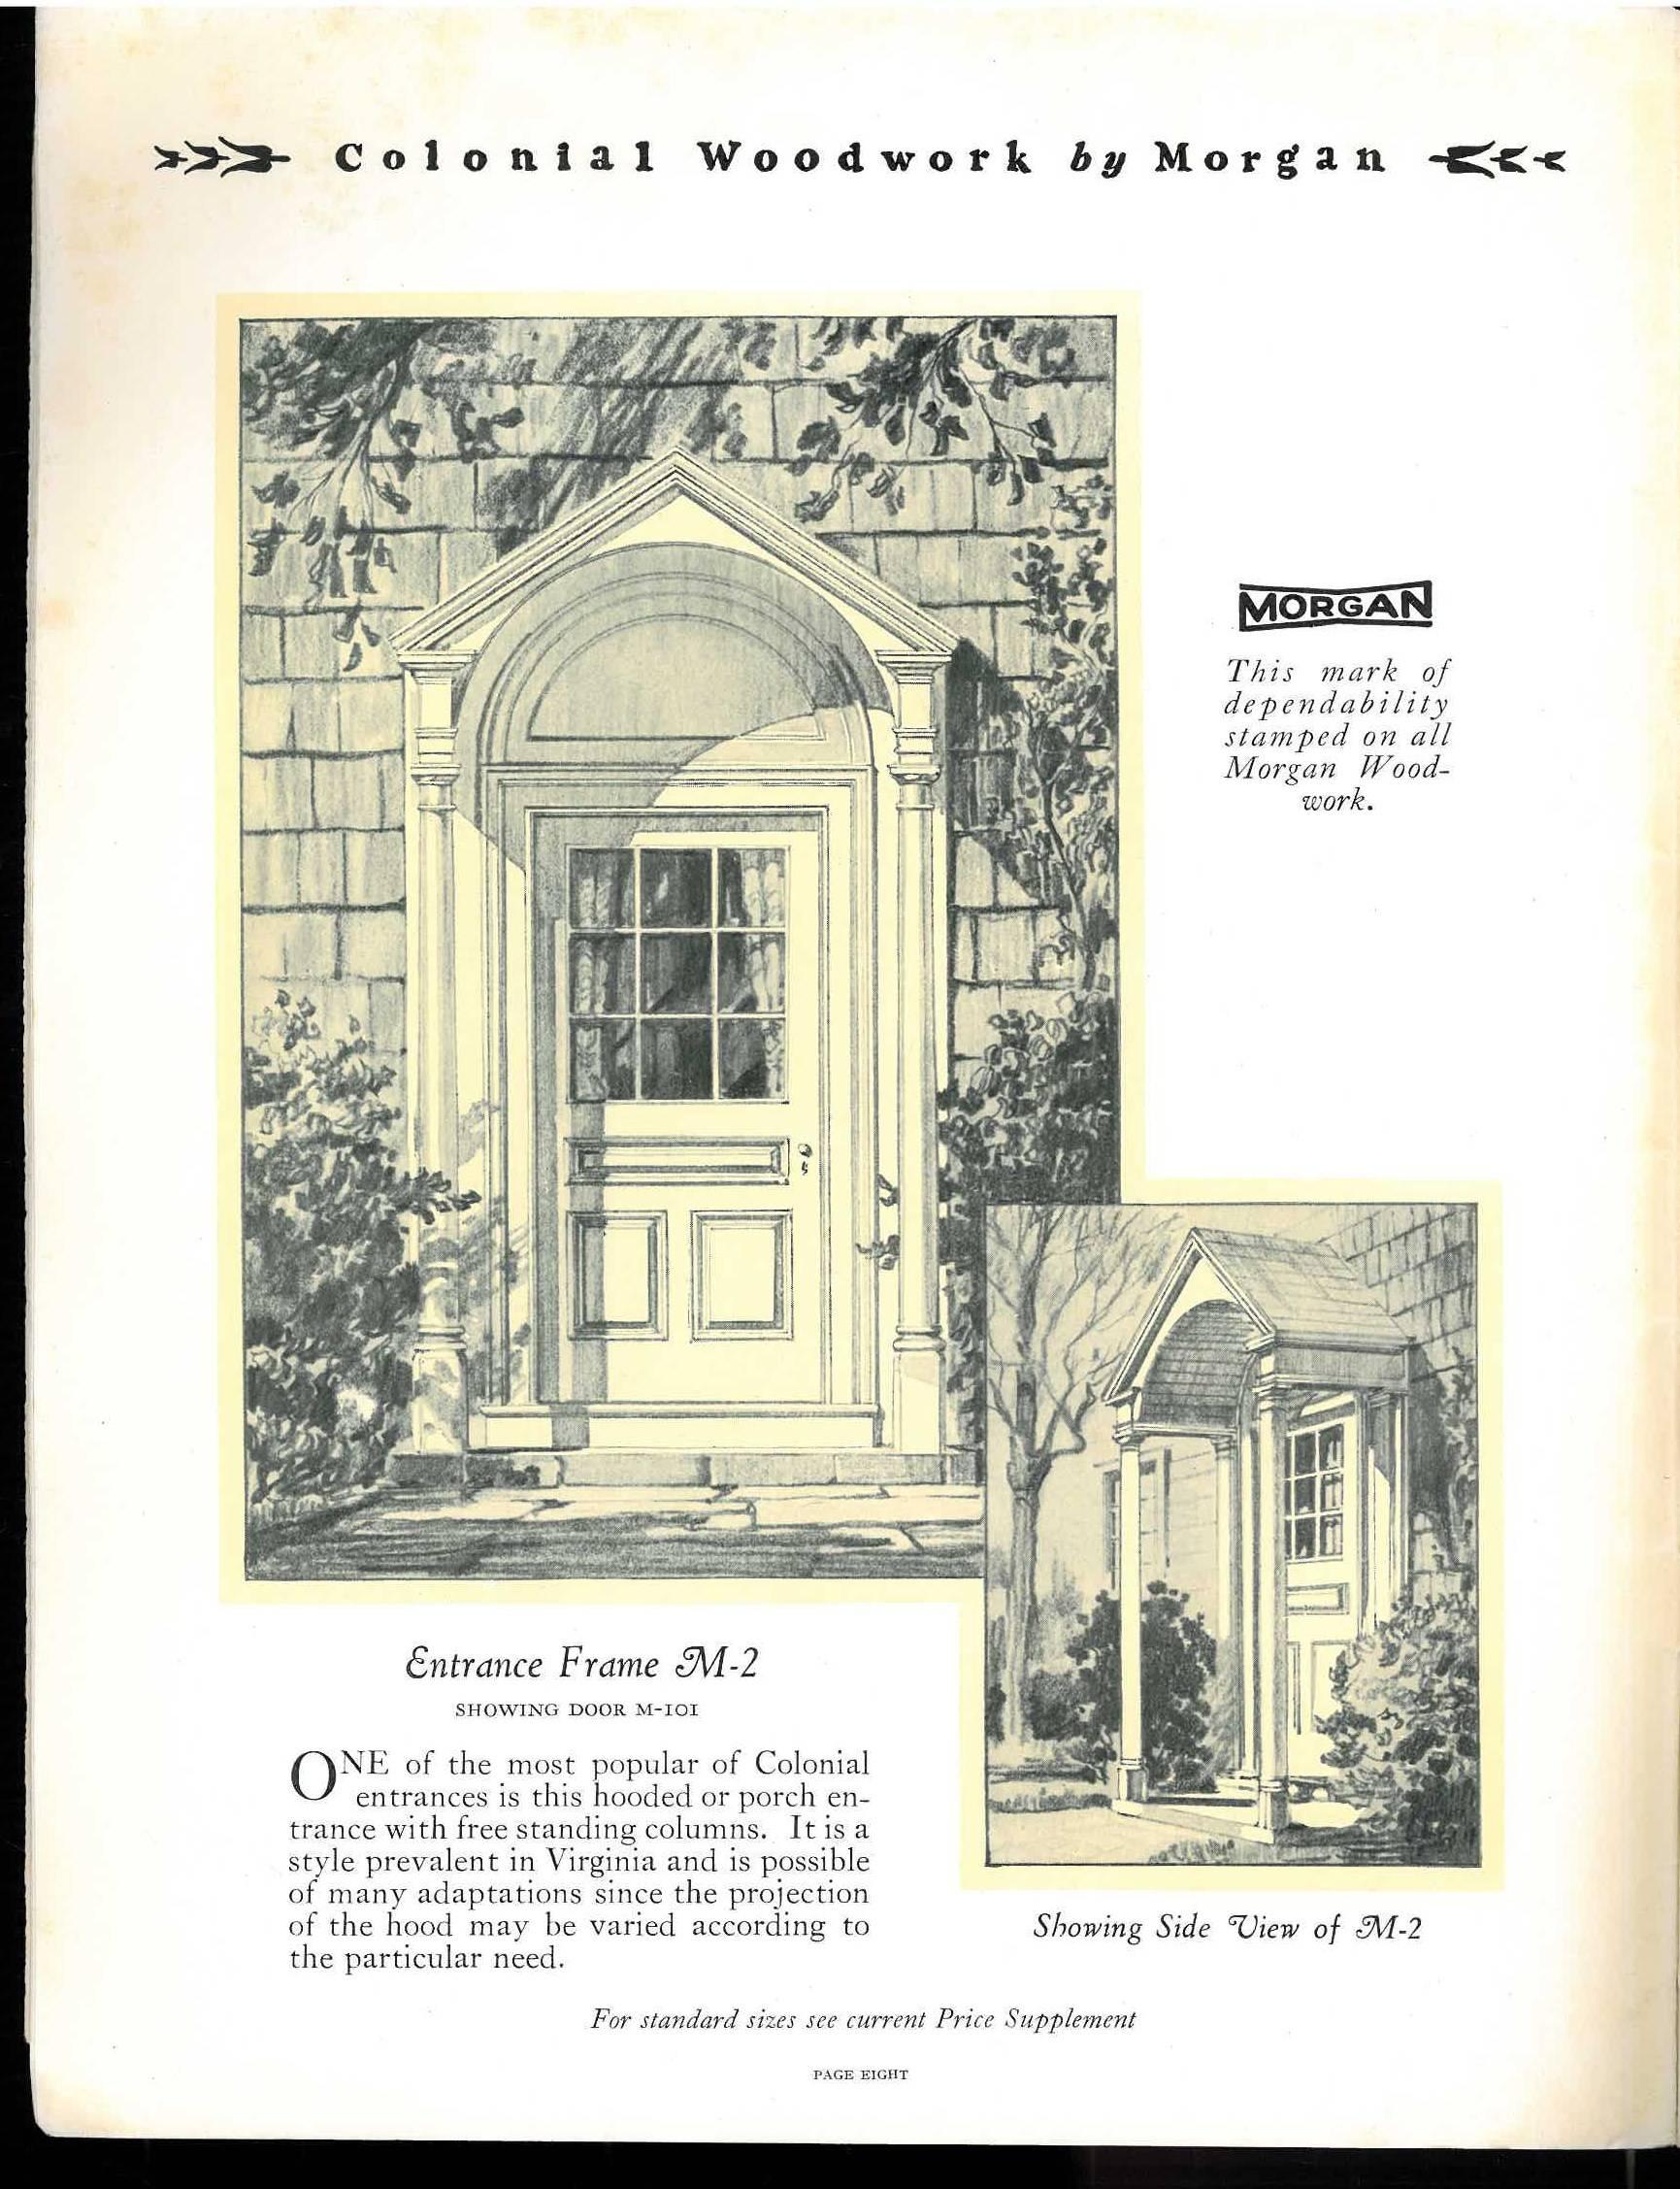 A very useful and interesting pamphlet dating from 1930 which was produced by the Morgan Woodwork Organization to show the designs for Colonial style of Woodwork and how it should be done. There are examples of porches and doors, stairways,